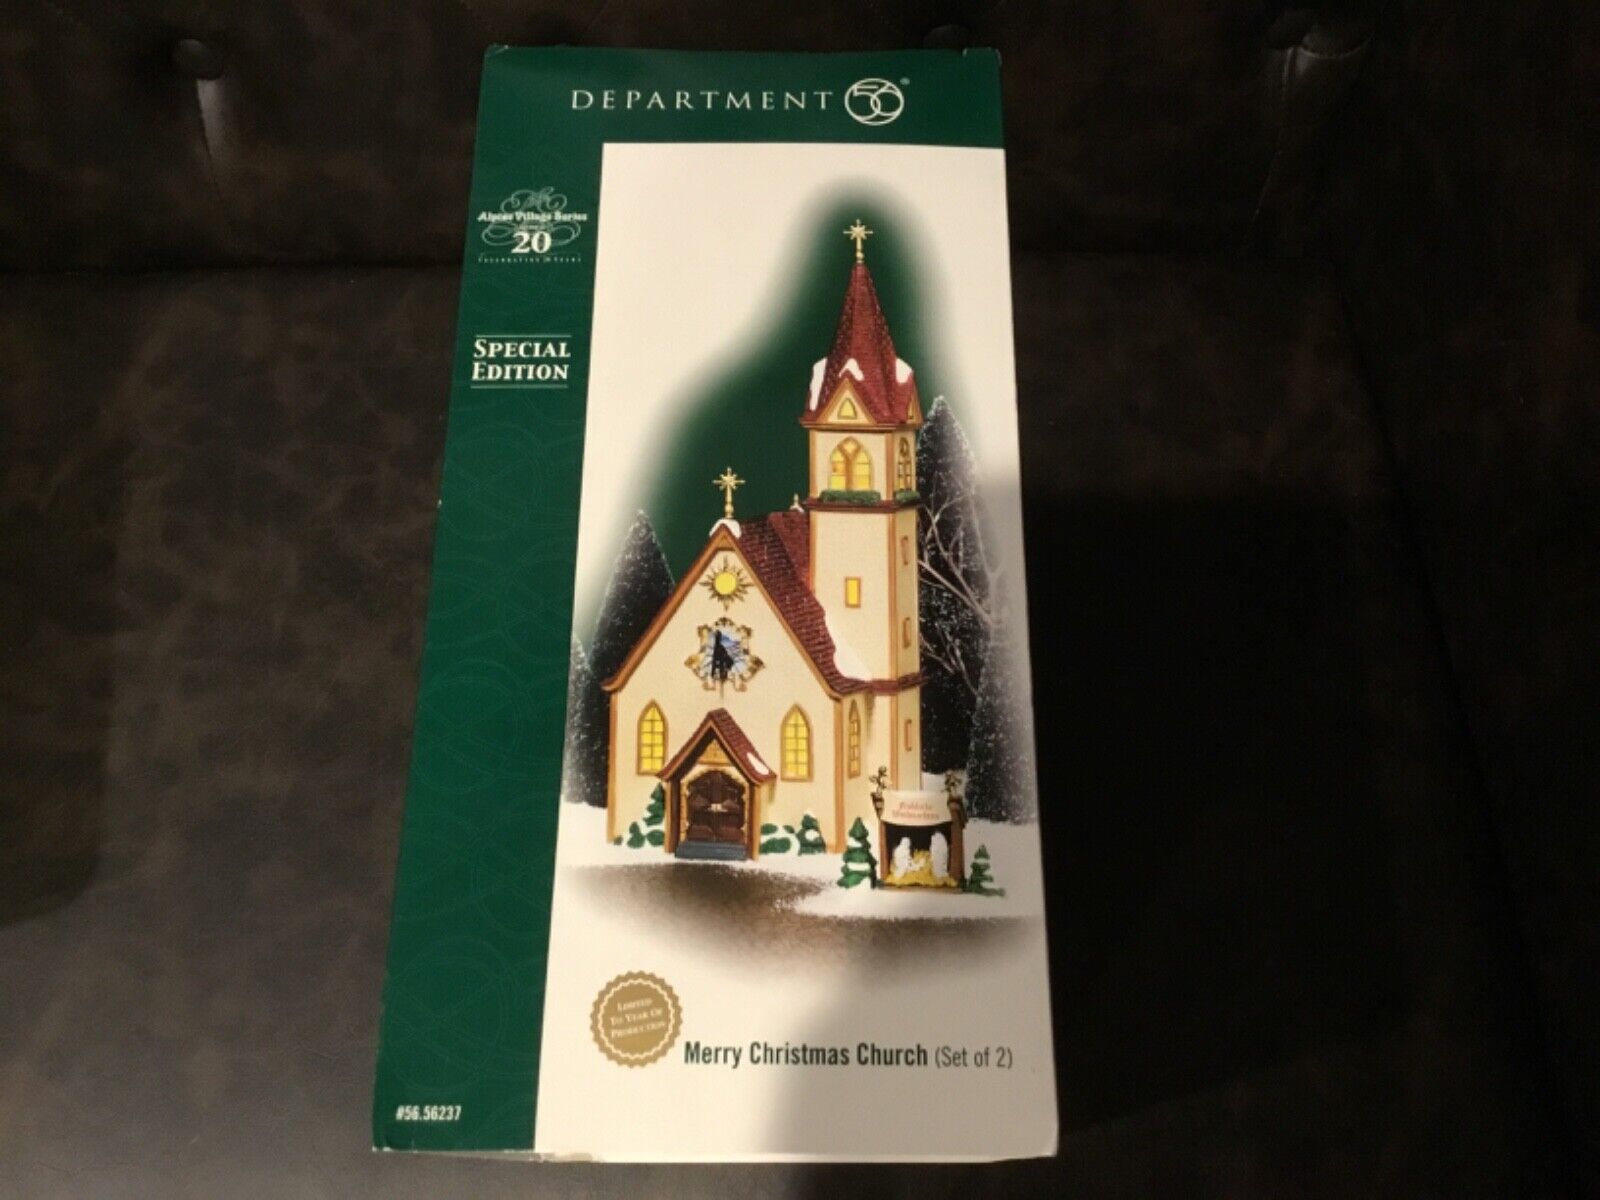 DEPT 56 SPECIAL EDITION #56.56237 MERRY CHRISTMAS CHURCH 